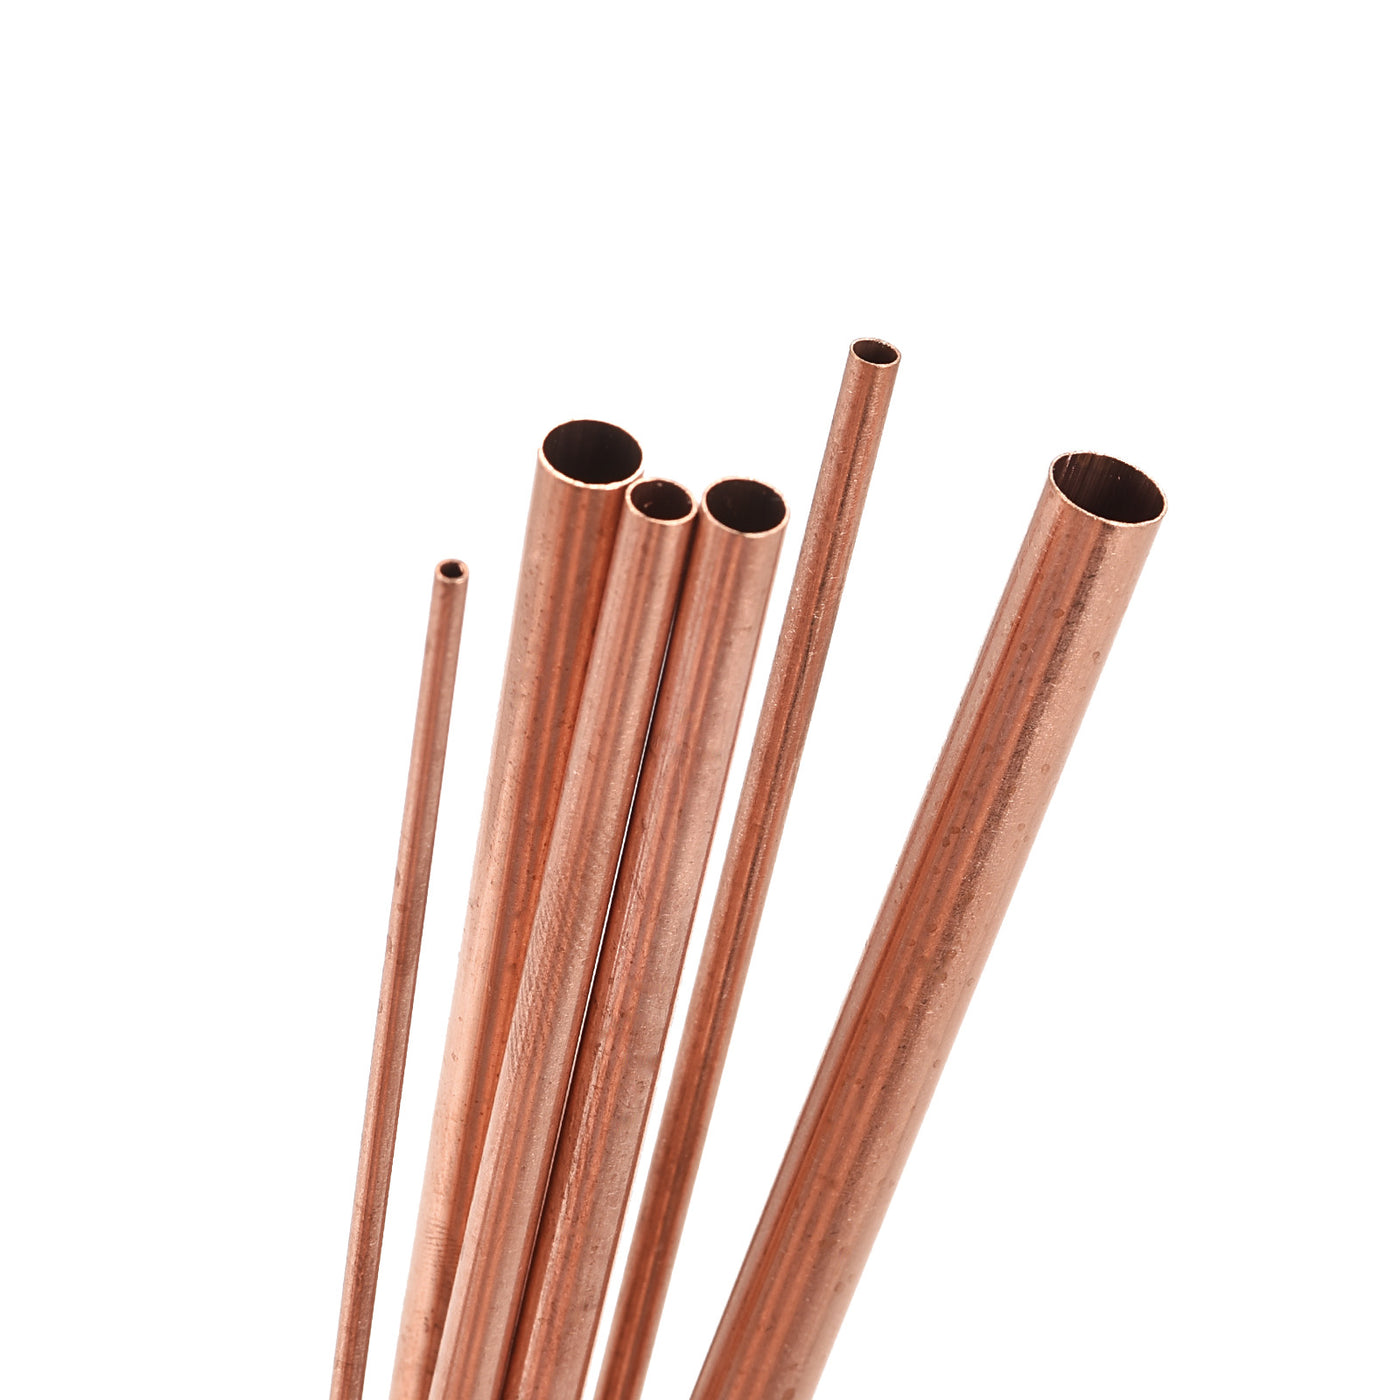 Uxcell Uxcell Copper Tube, 2mm 3mm 4mm 5mm 6mm 7mm OD x 0.5mm Wall Thickness 200mm Length Metal Tubing, Pack of 6